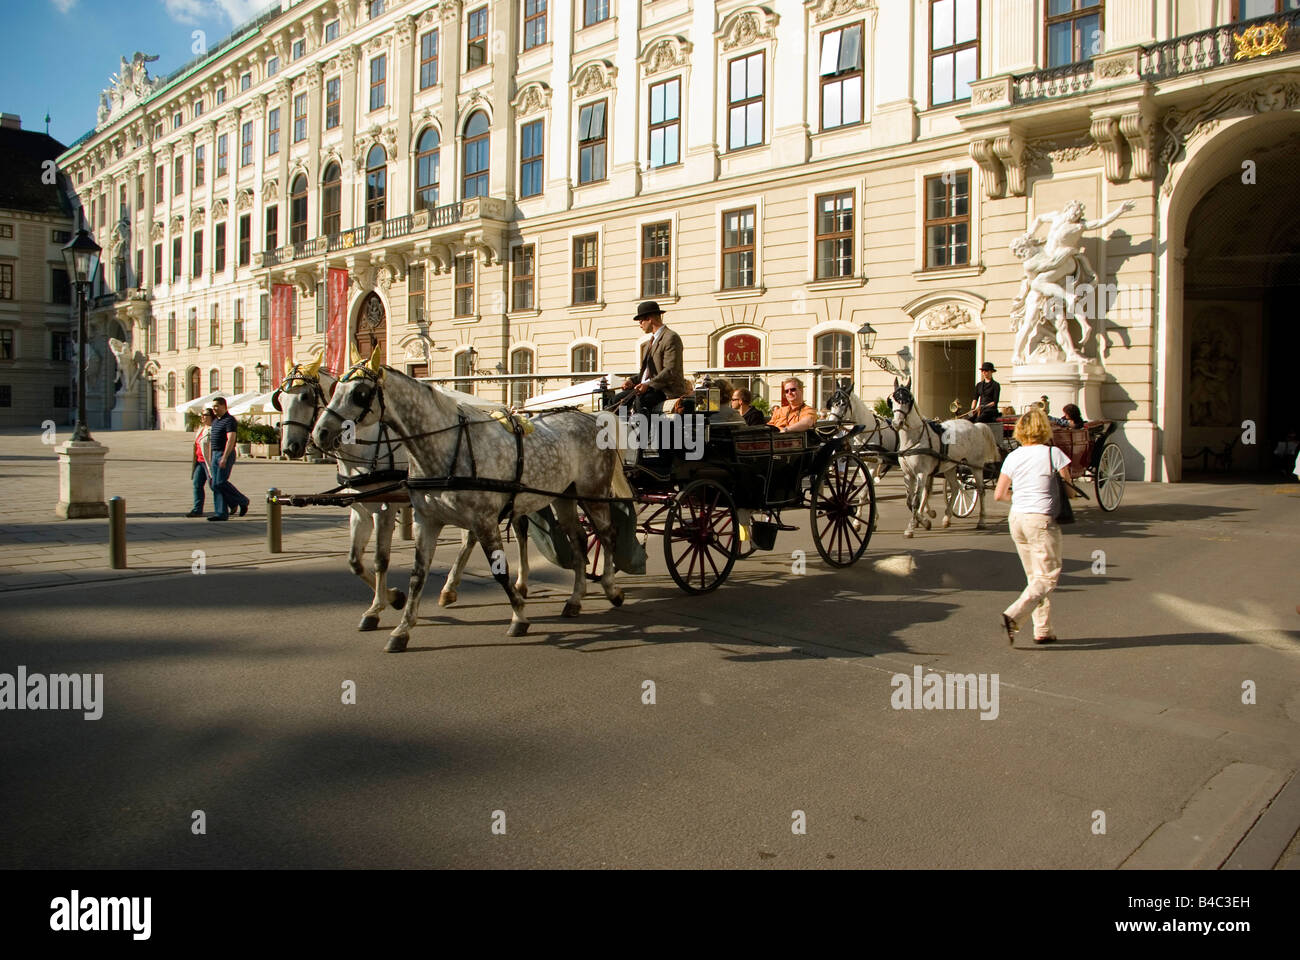 Carriage with tourists in Hofburg Palace in Vienna Austria Stock Photo